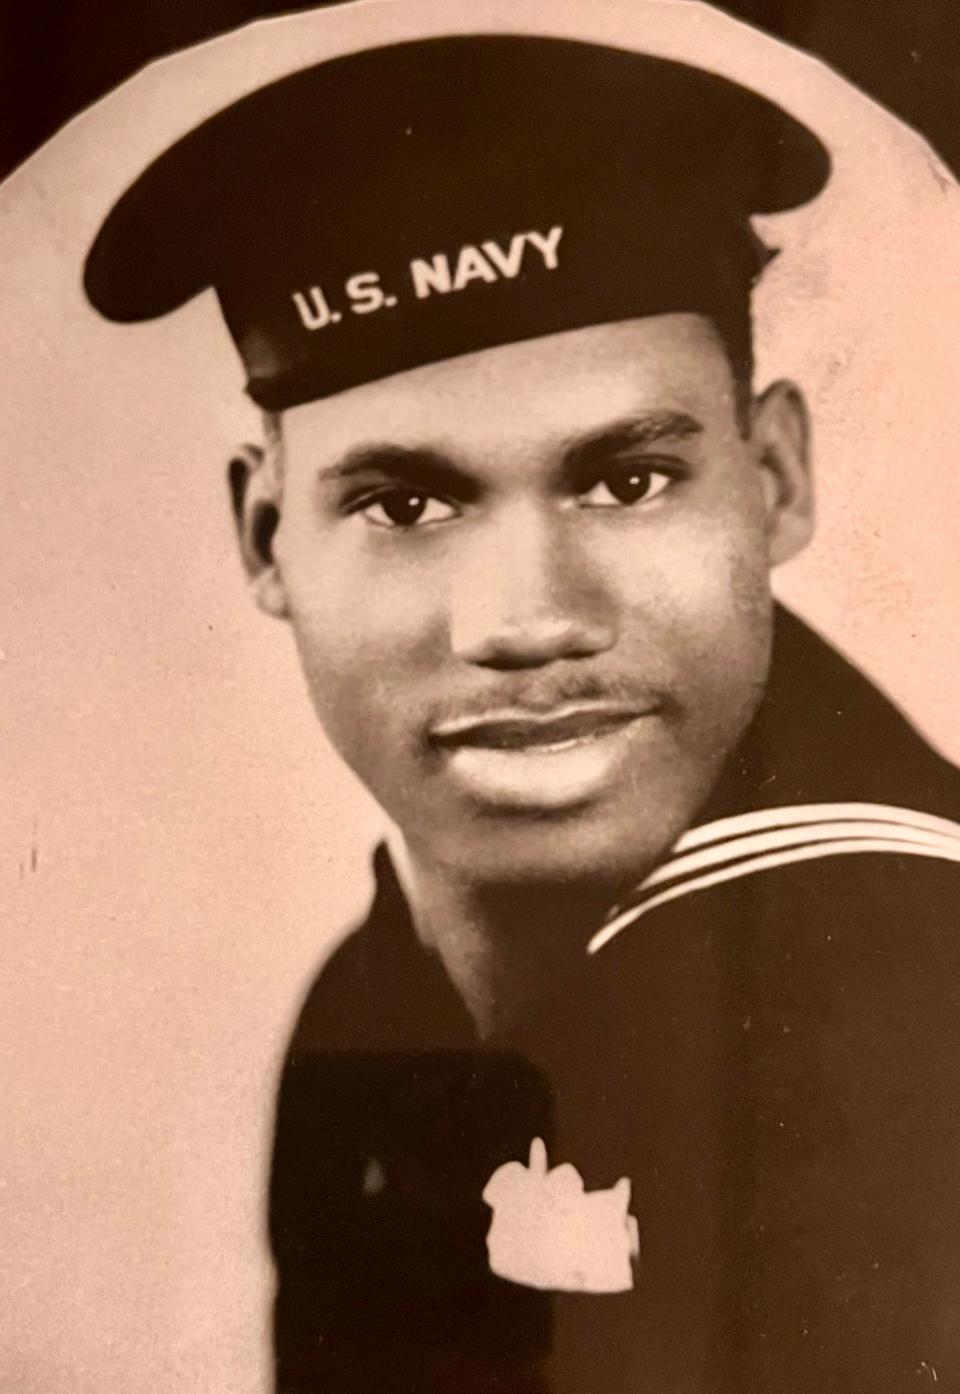 Carl Tuggle was drafted after he graduated from Woodward High School and served in the U.S. Navy from 1943-1945, during World War II.